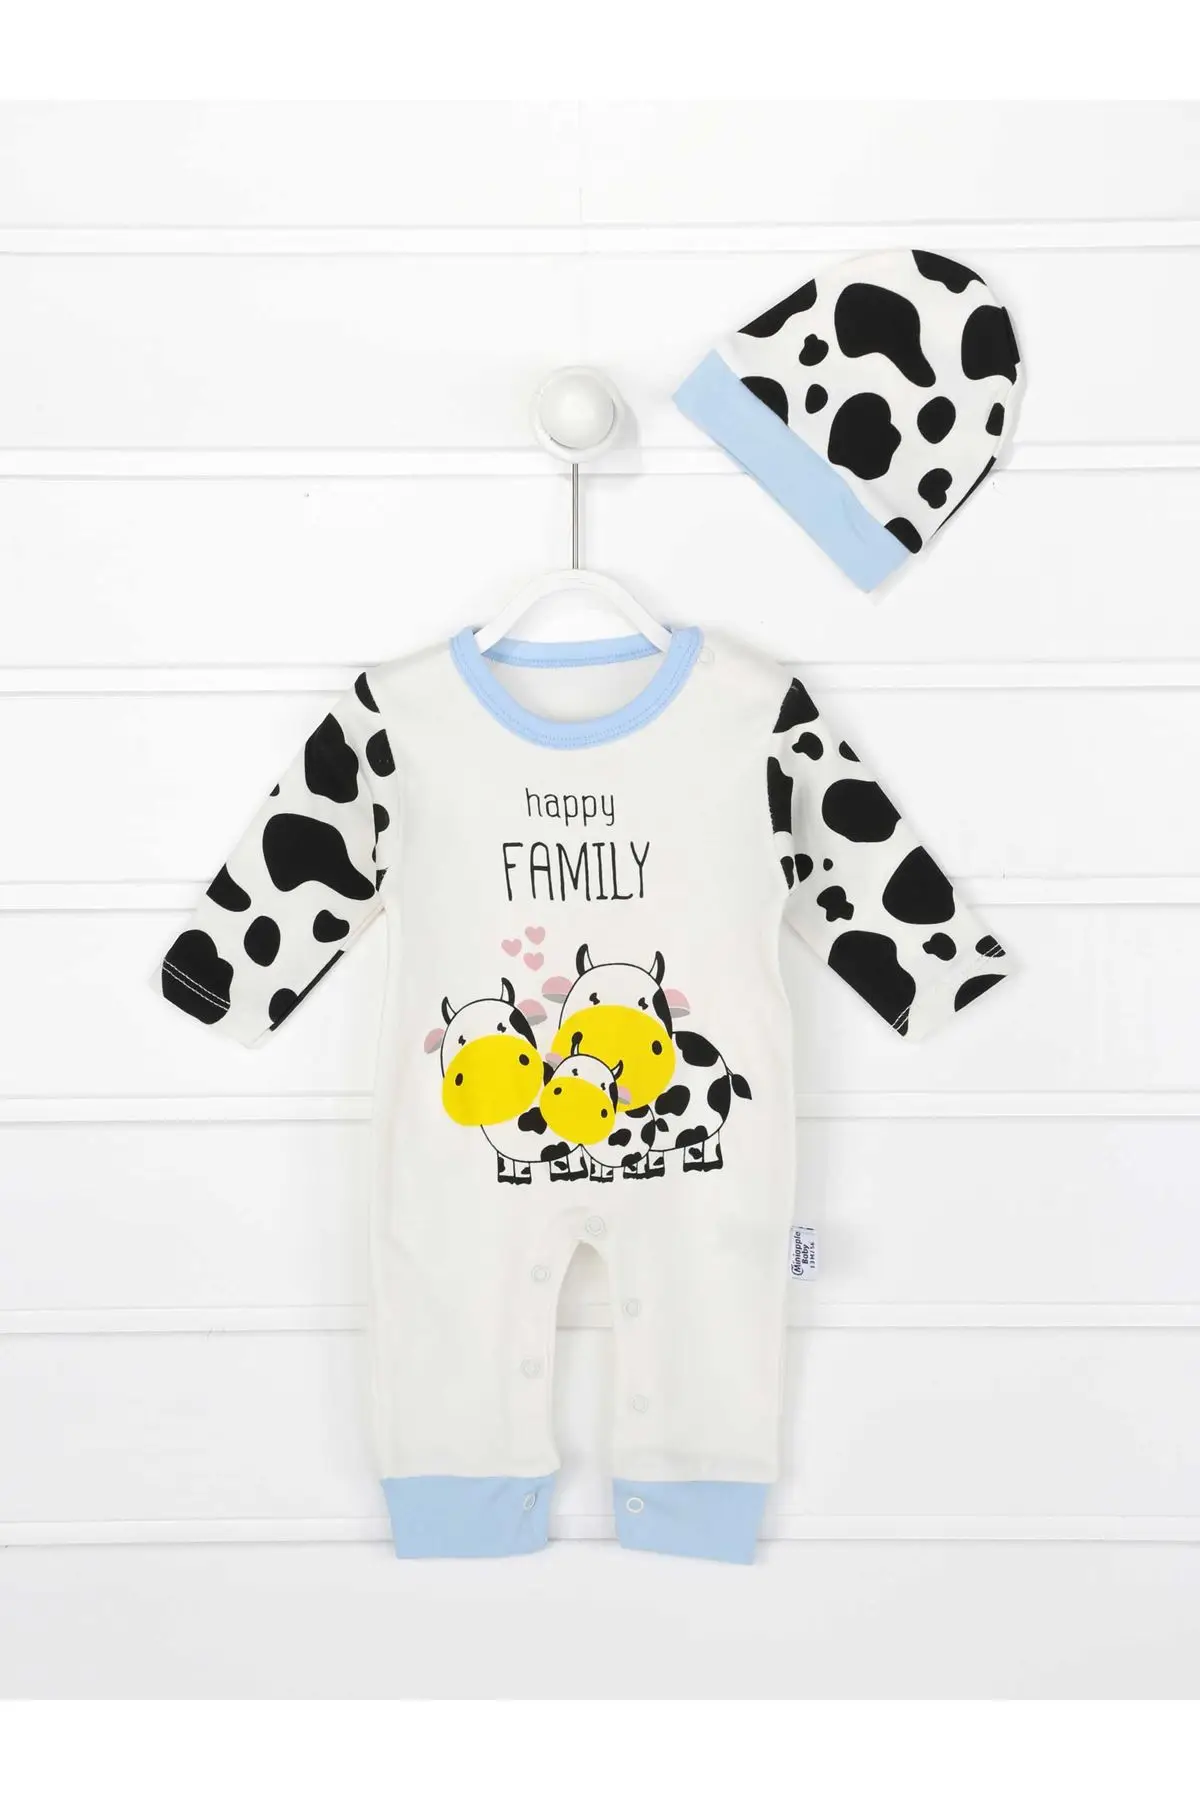 

Baby Boy Rompers New Born Cow Patterned And Figured Cotton Hat Cute Male Baby Suit Babies Clothing Outfit 2 Pieces clothes